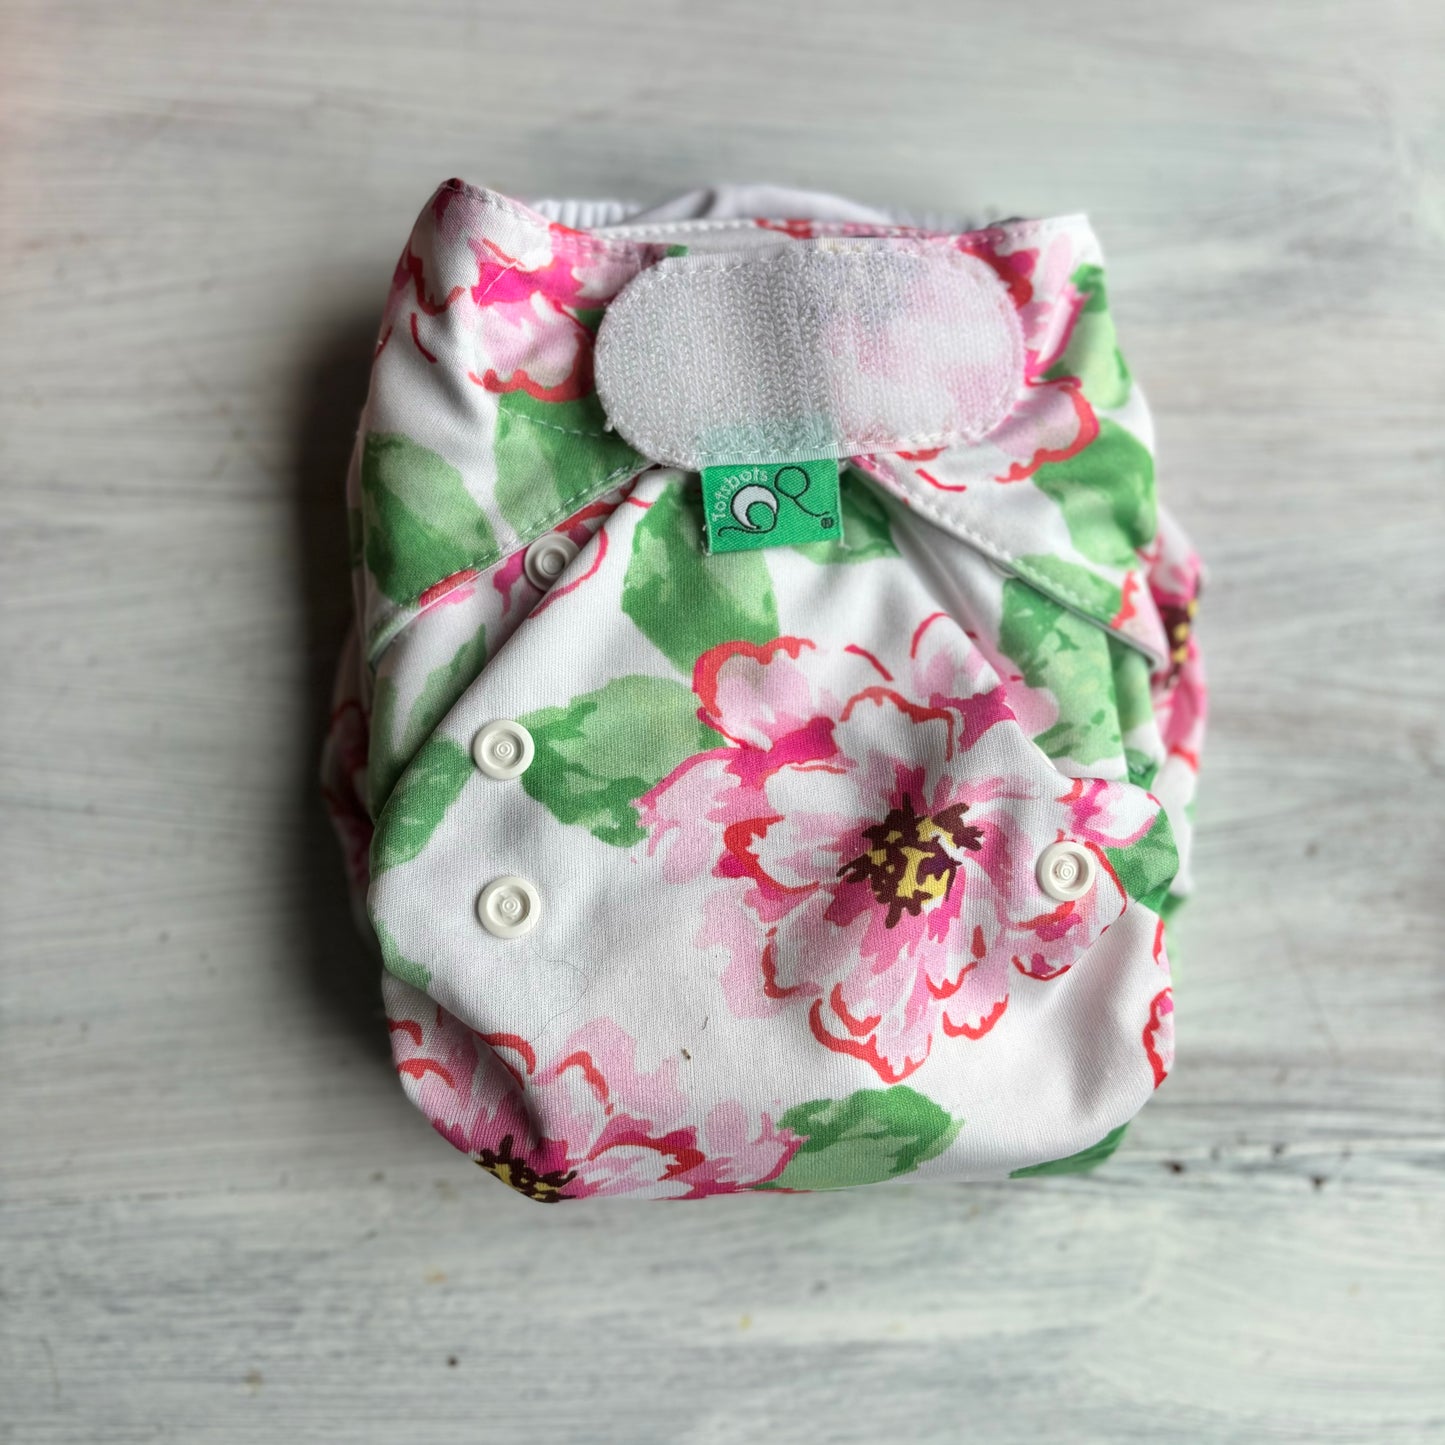 Tots Bots Easyfit All in One Nappy-All In One Nappy-Tots Bots-Floral-The Nappy Market